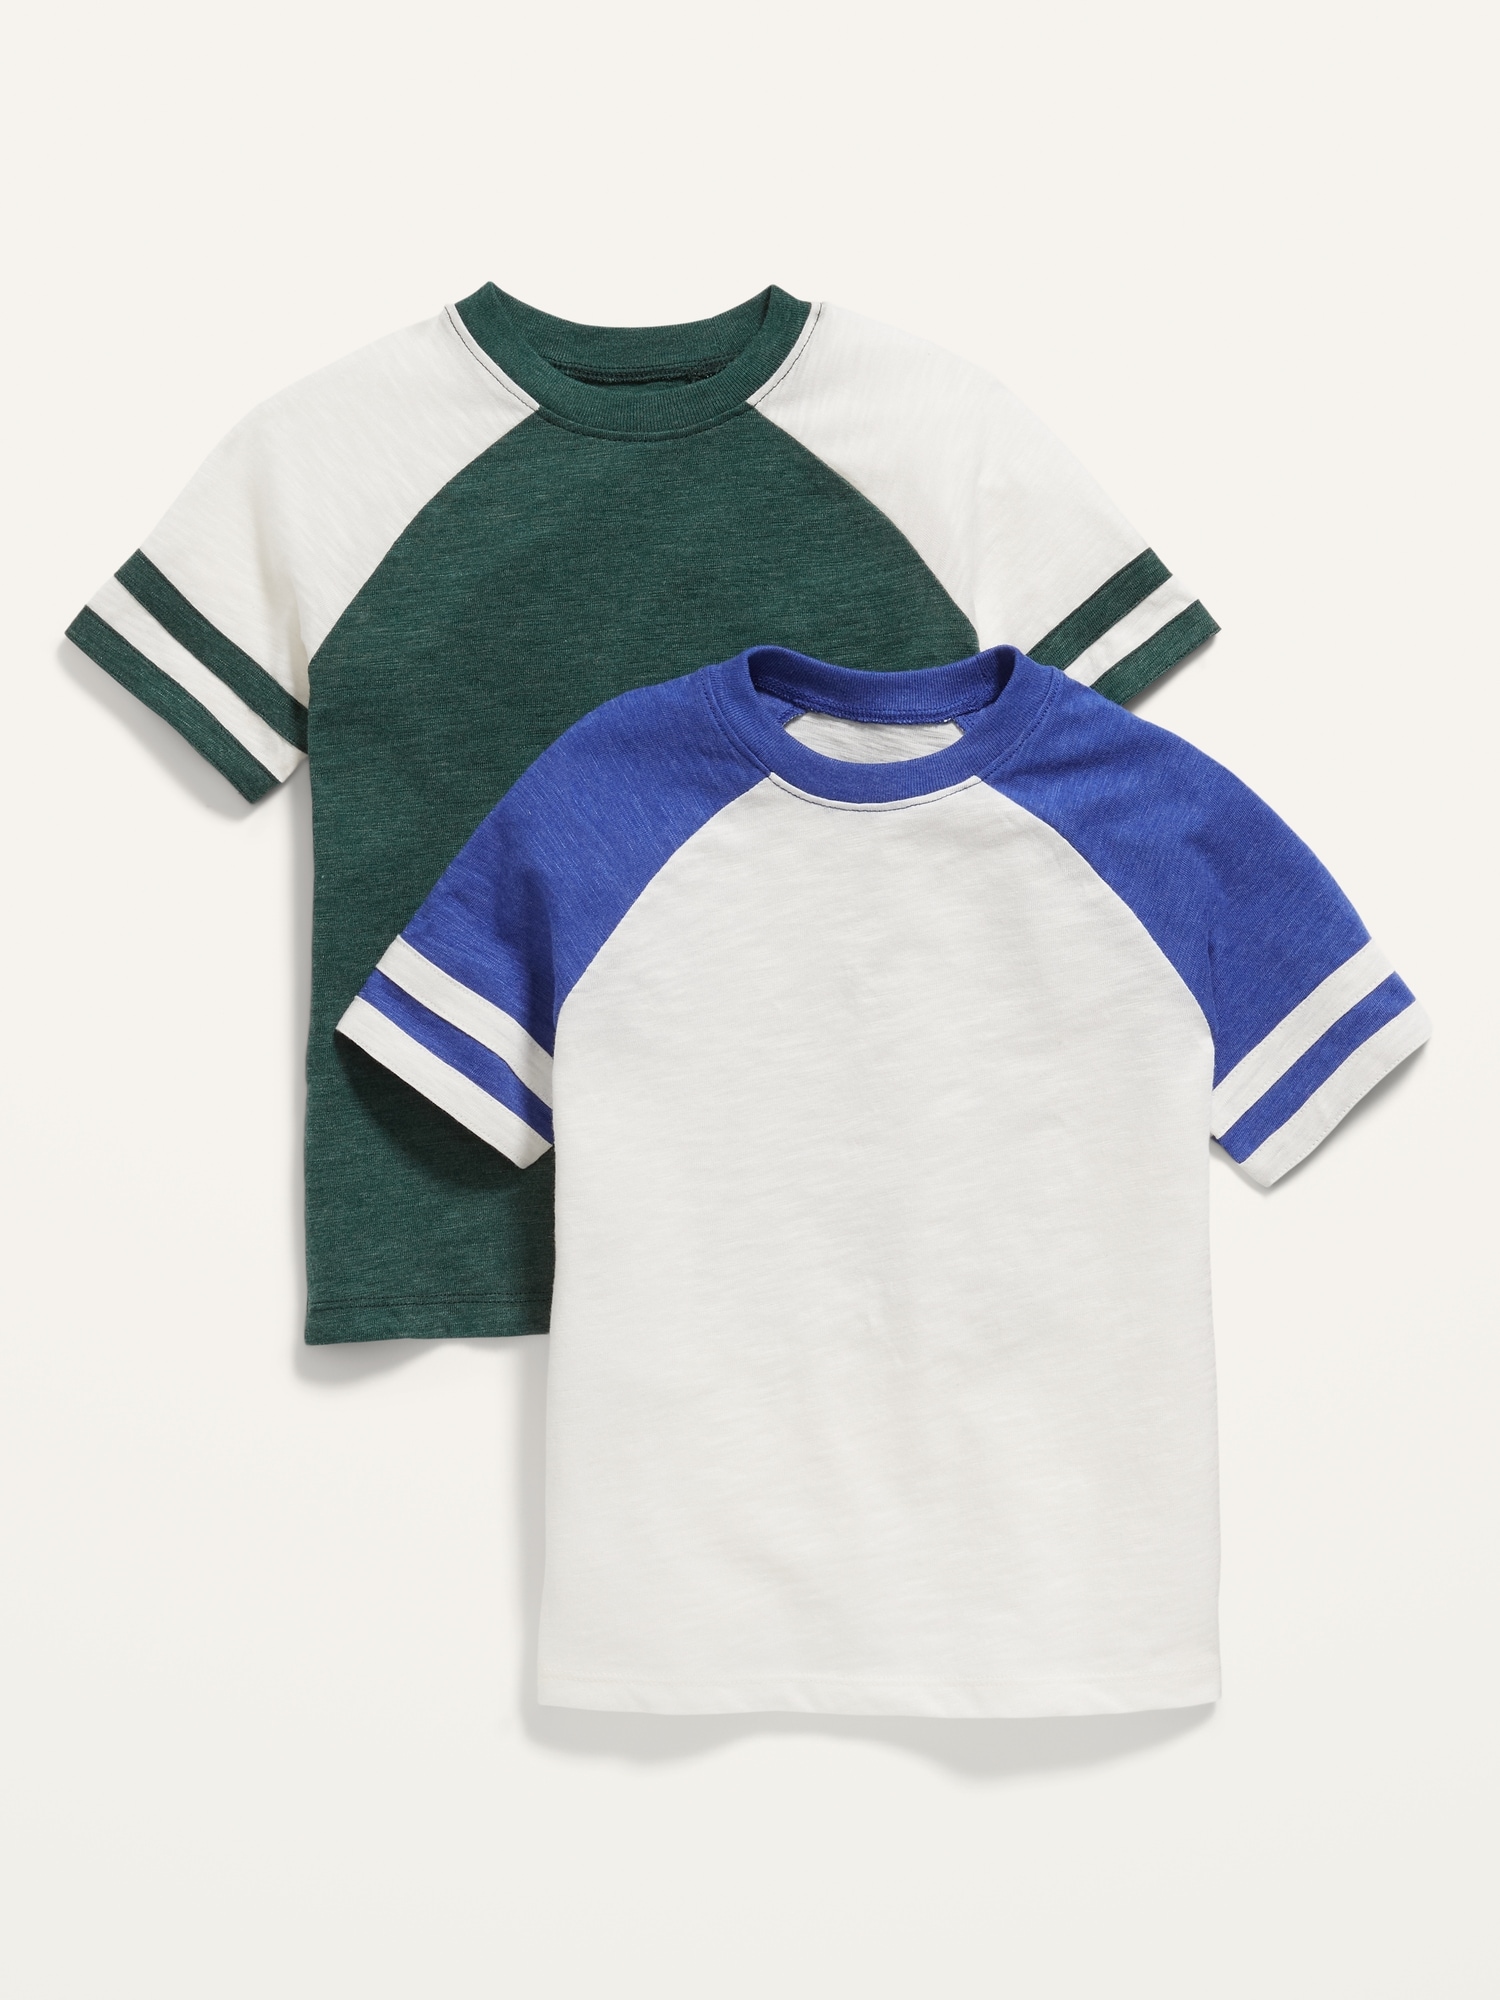 2-Pack Toddler Boy Basic Solid Color Short-sleeve Cotton Tee